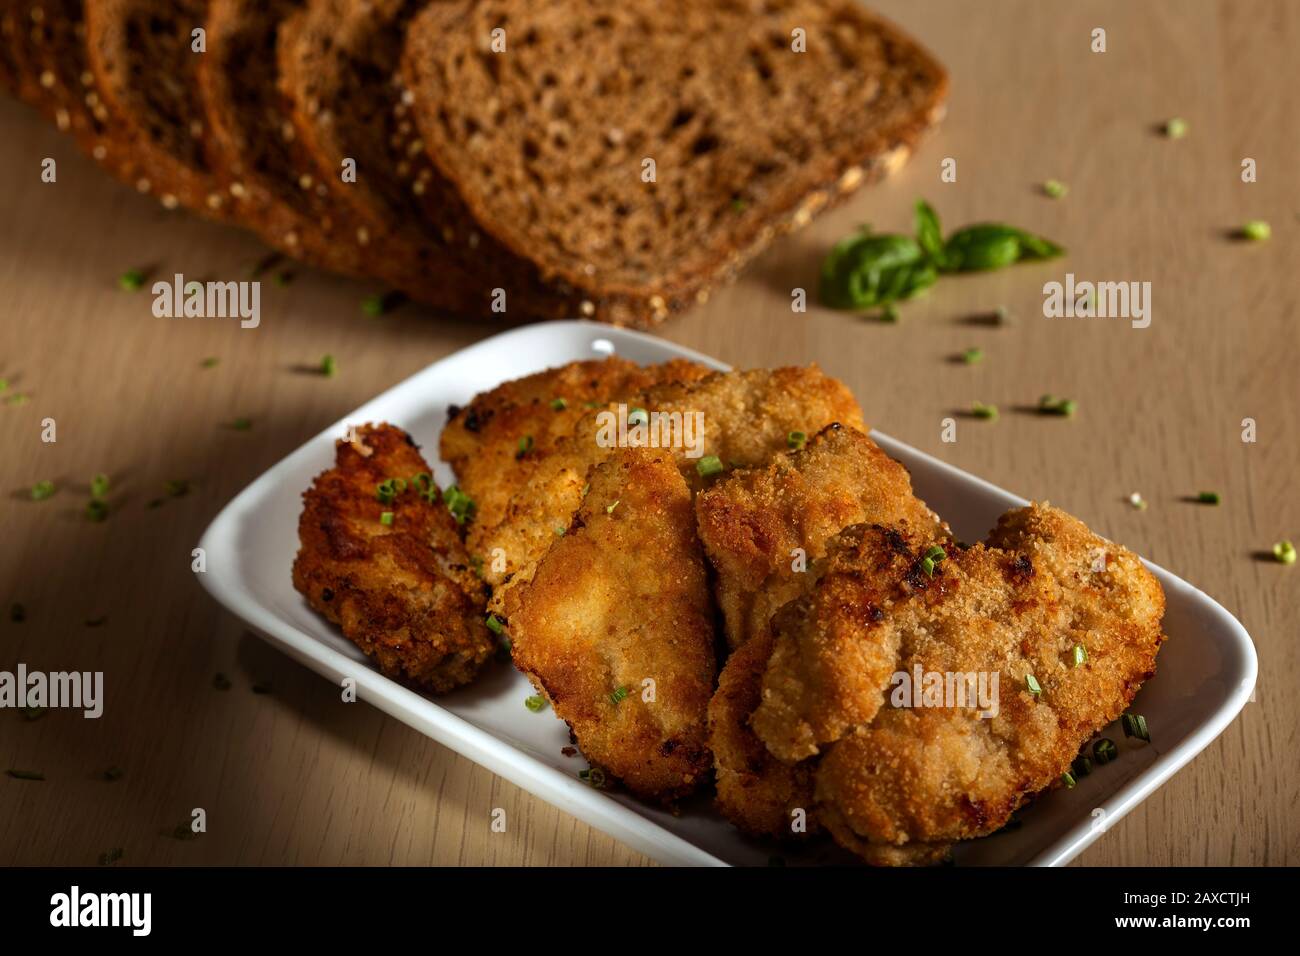 Pieces of pork schnitzel on plate with herbs Stock Photo